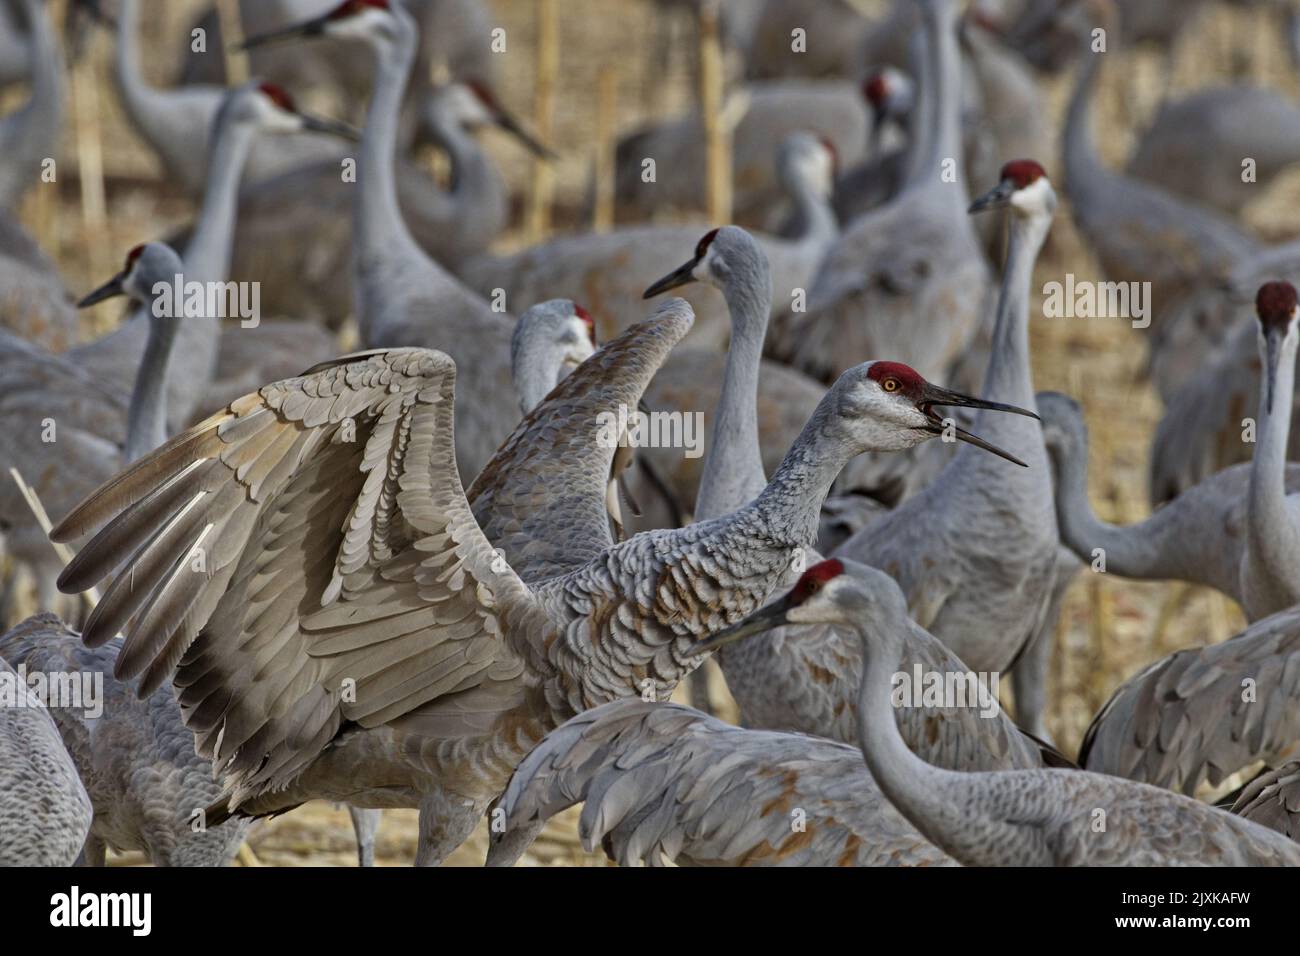 Sandhill crane opens wings, leans forward, opens beak, and squawks loudly in New Mexico flock at land and resource managed Bernardo Waterfowl Manageme Stock Photo